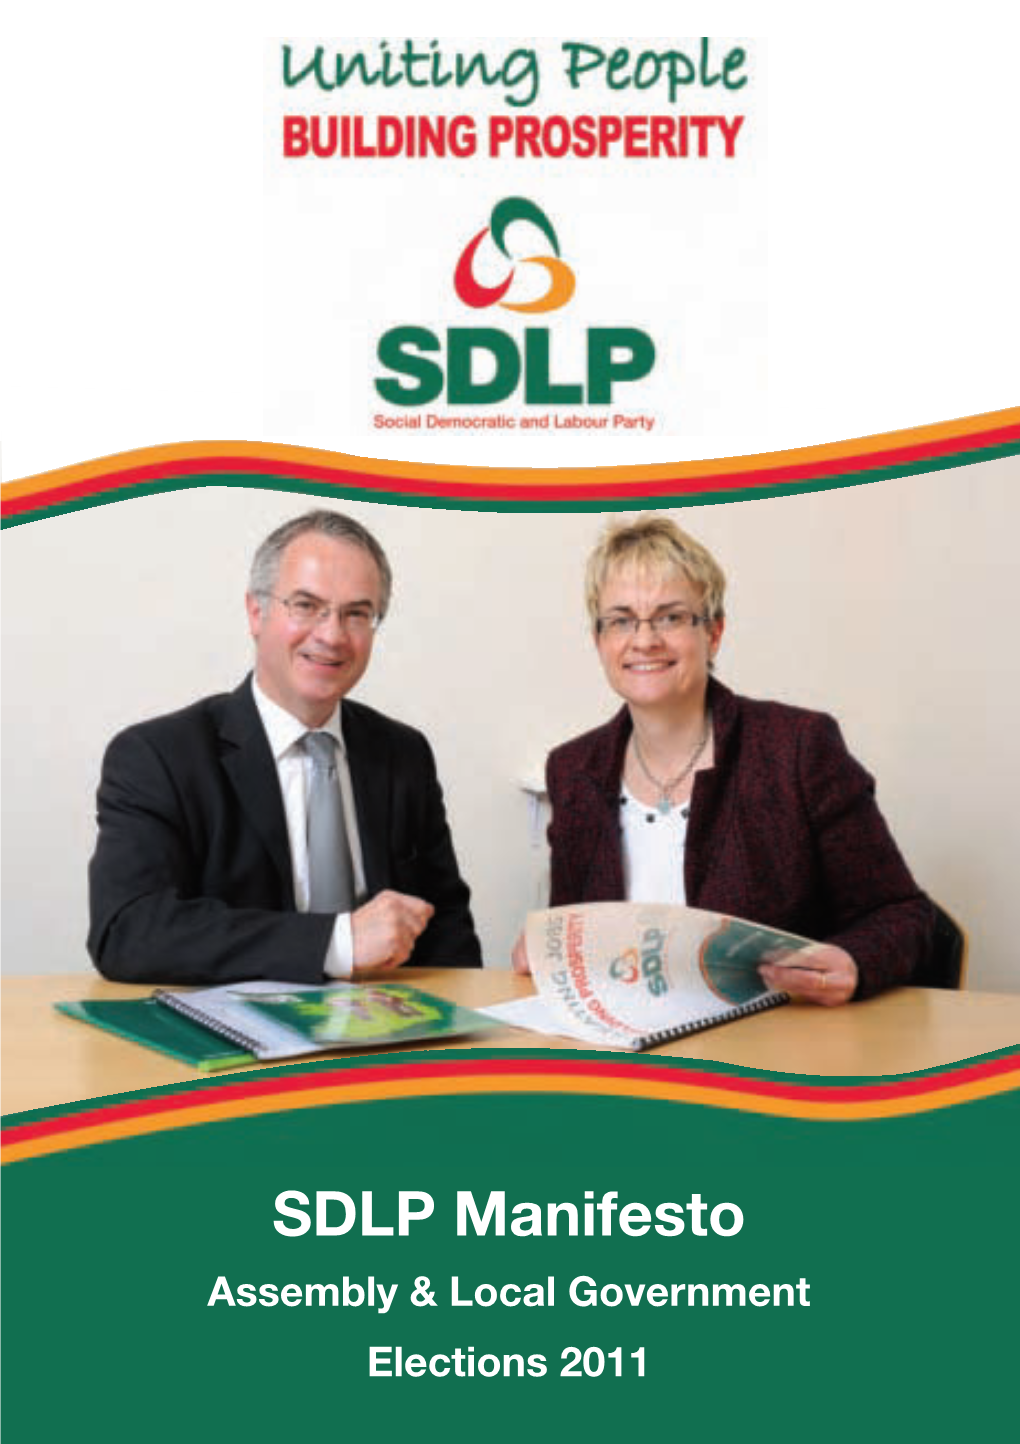 SDLP Manifesto Cover Layout 1 16/04/2011 11:35 Page 2